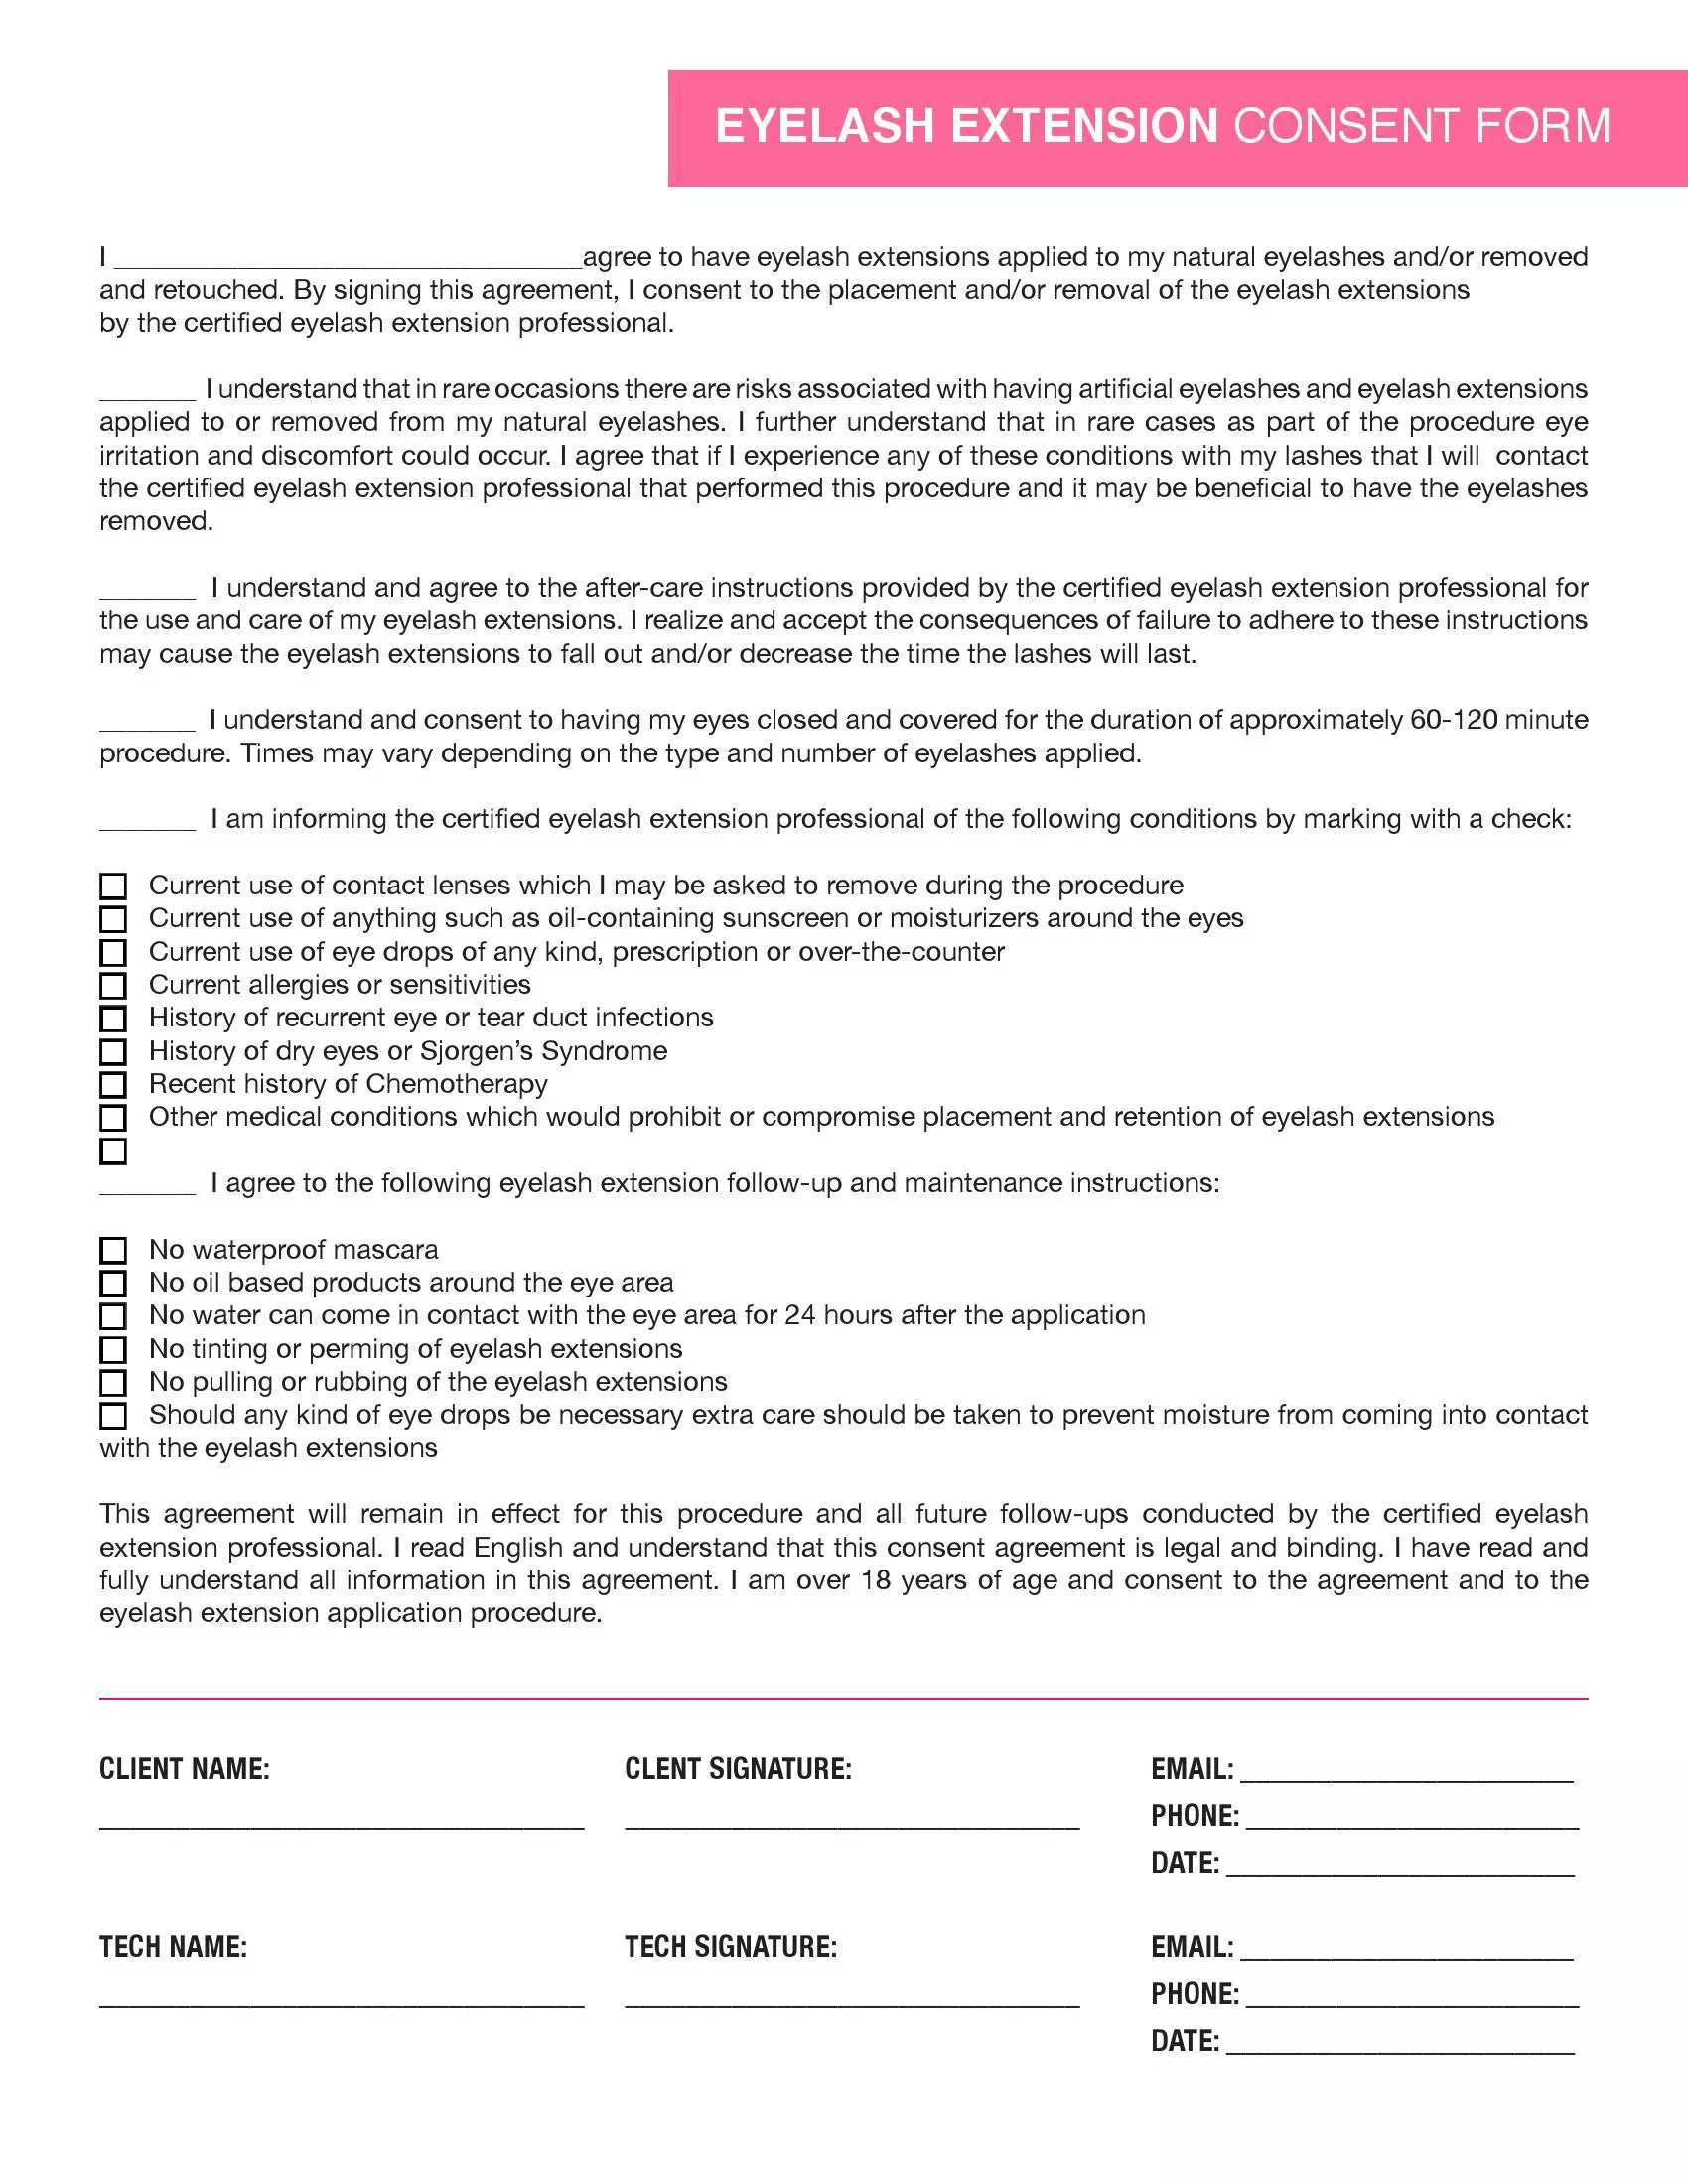 eyelash extension consent form preview